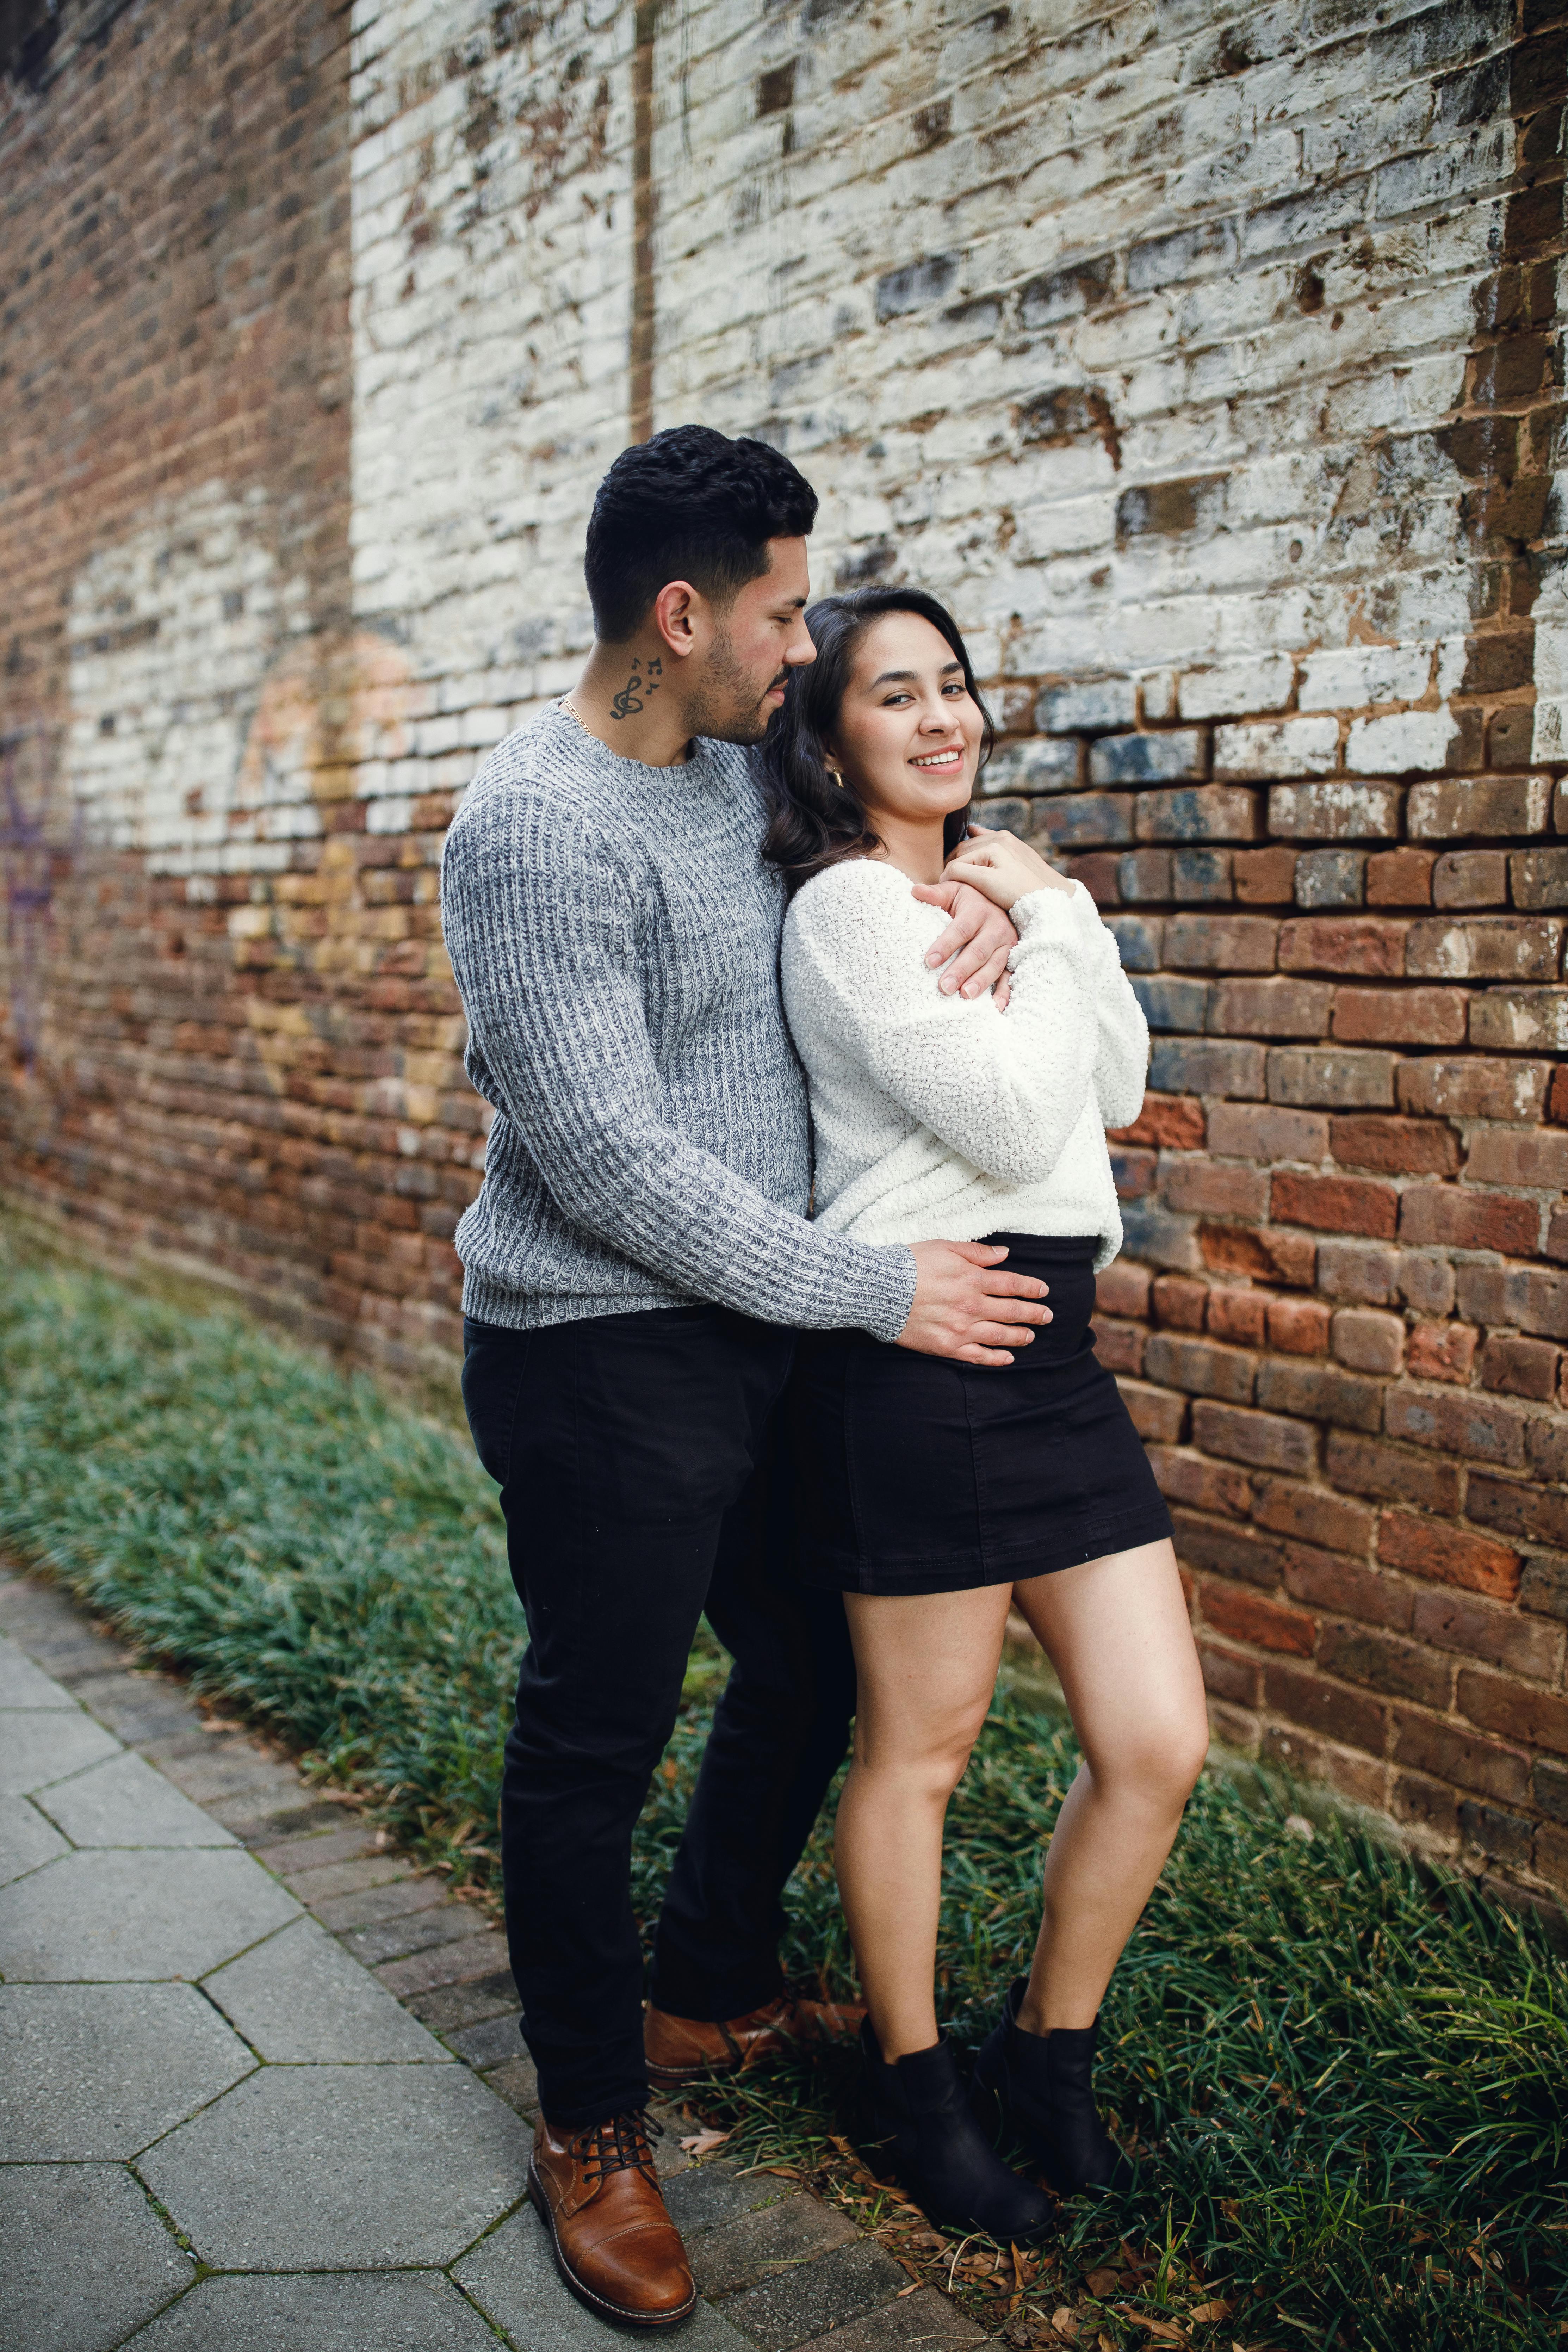 Couples Casual or Engagement Photoshoot Pose Ideas | Gallery posted by  Angelina | Lemon8